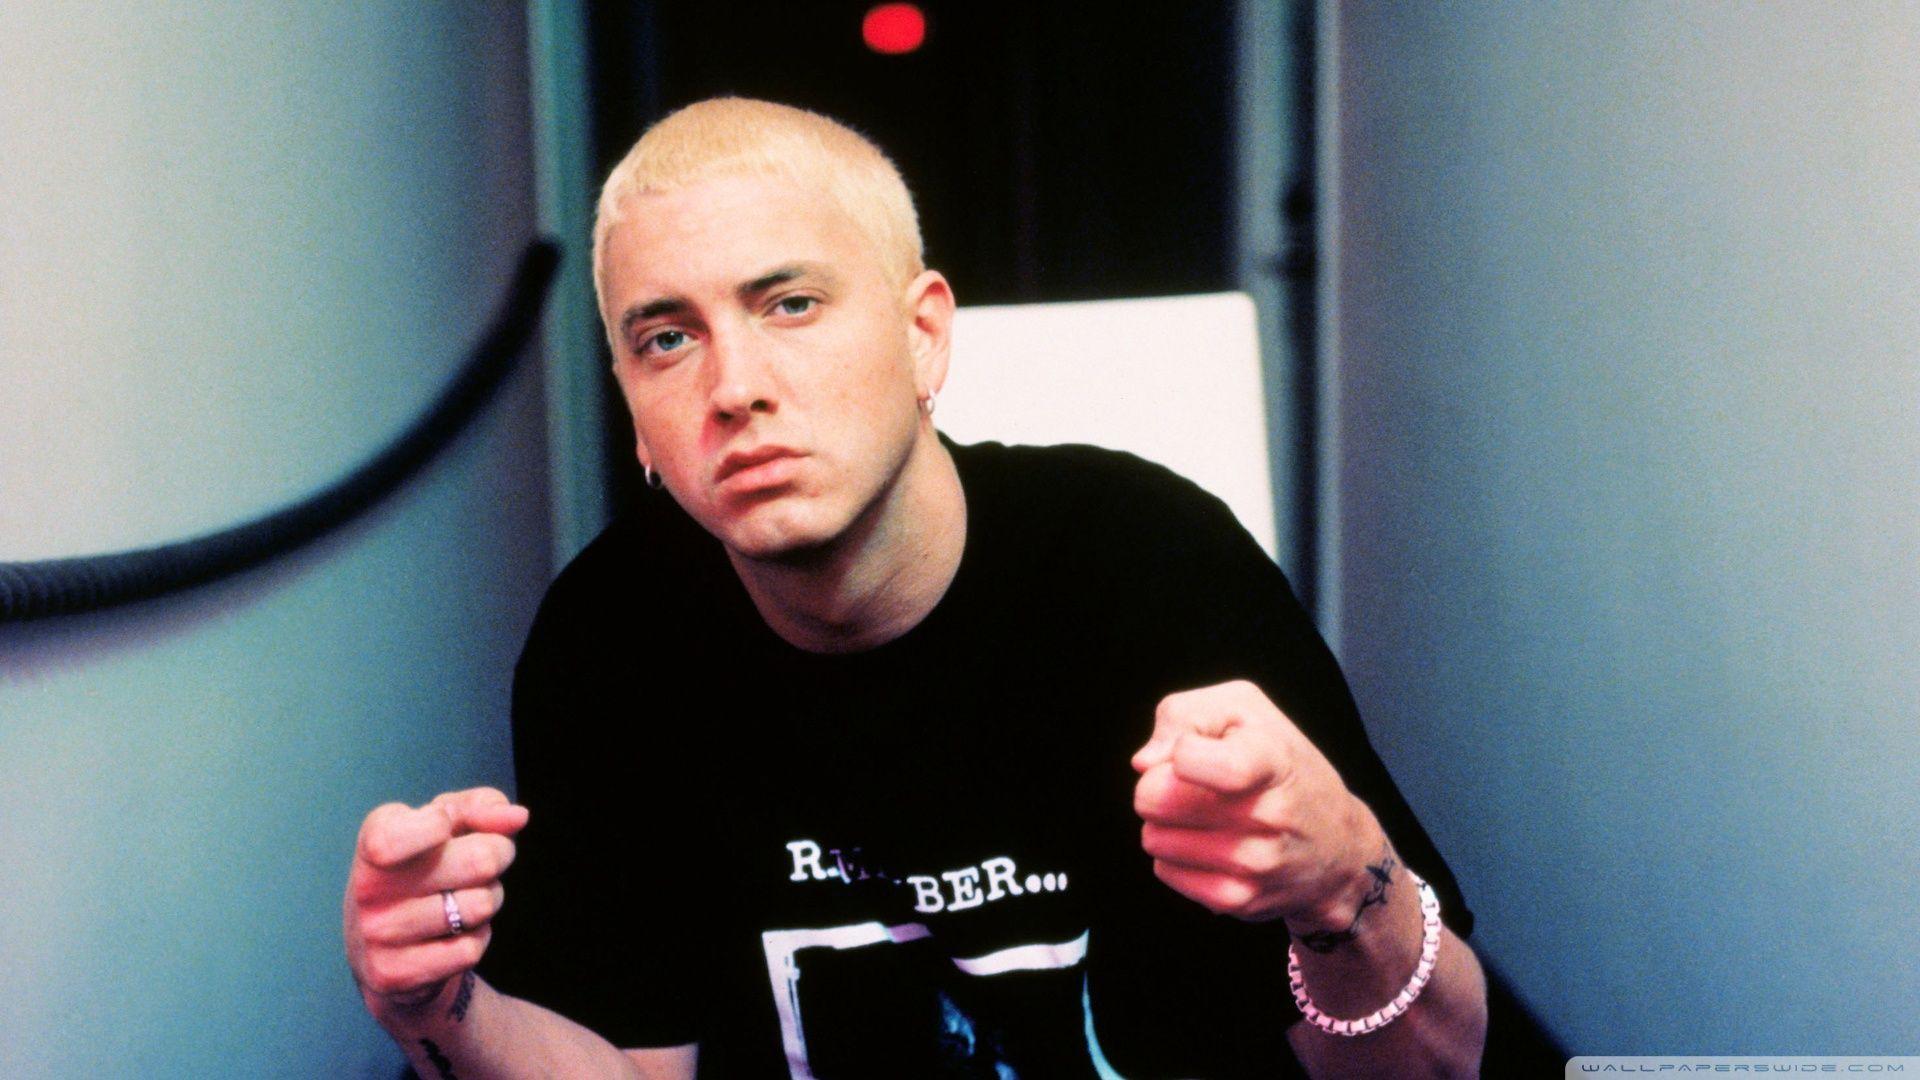 Whats wrong with Eminem? rock 95.5